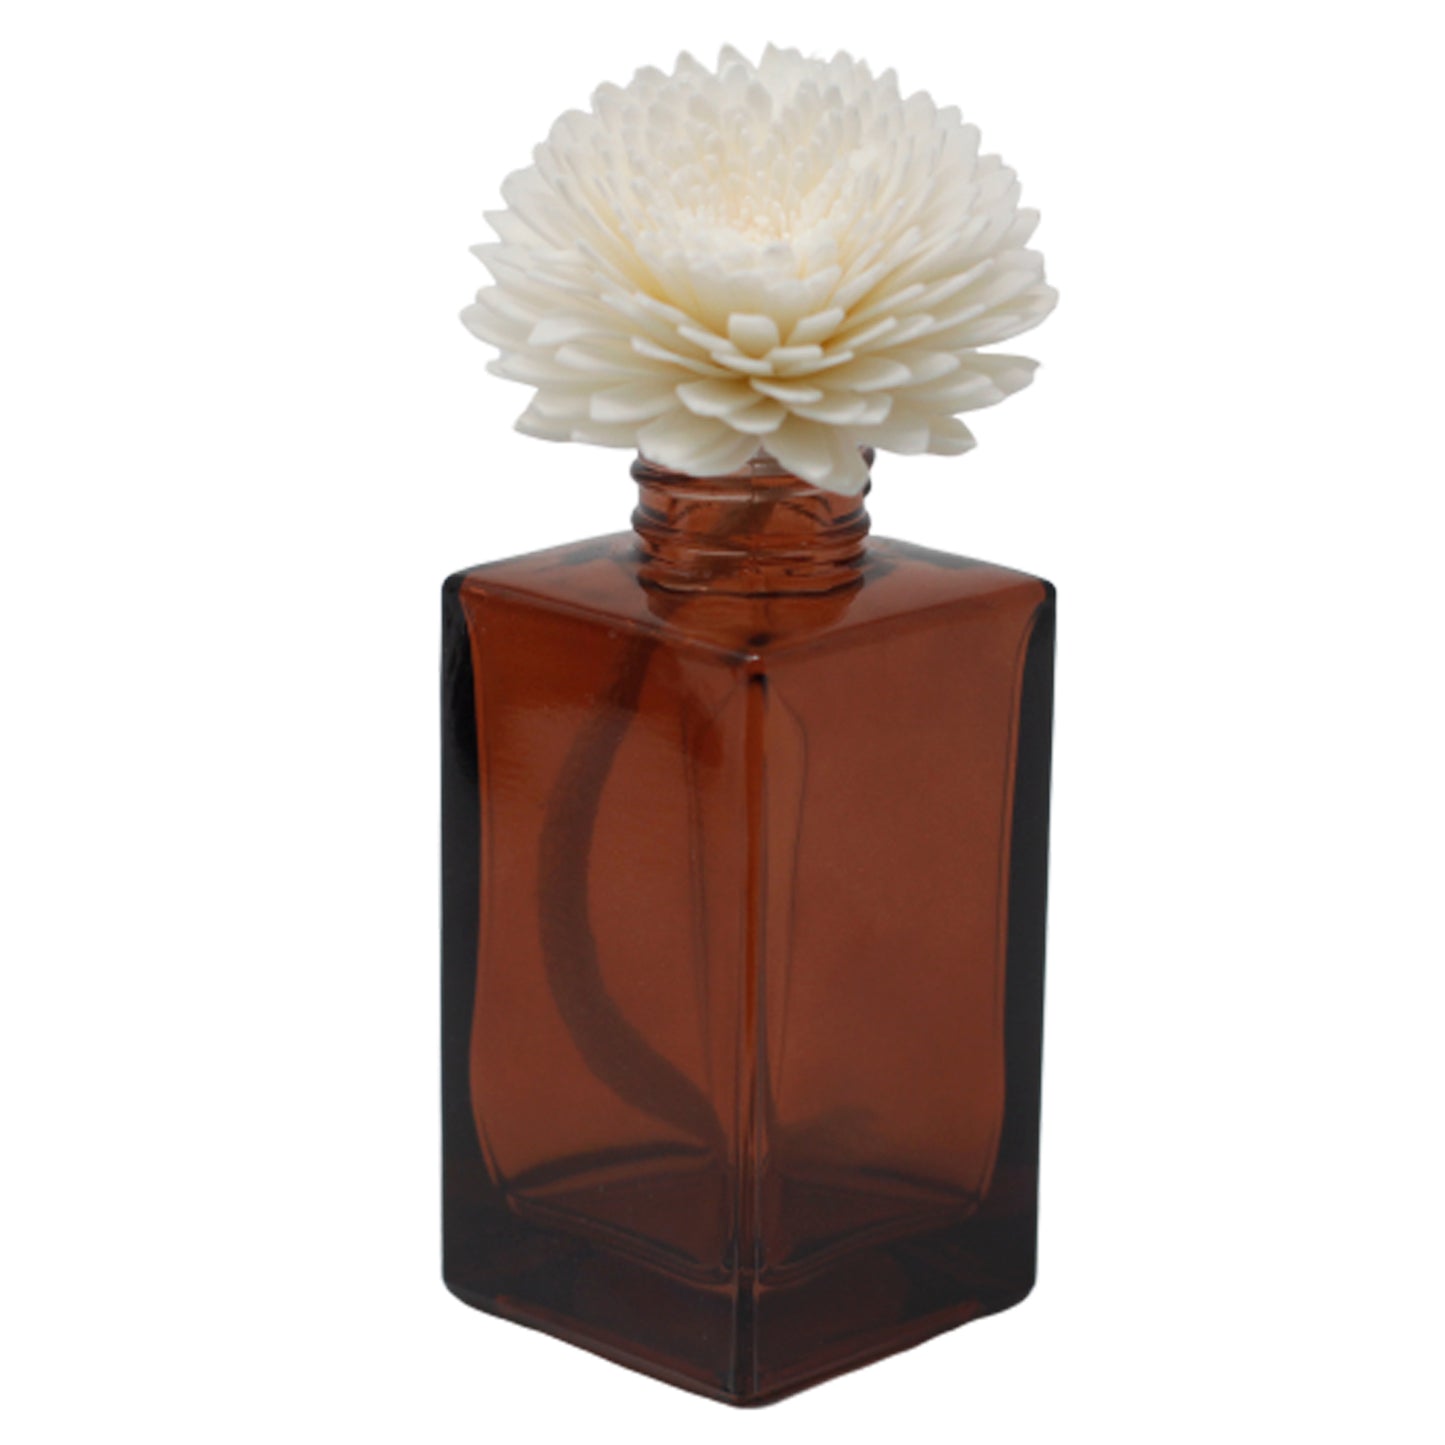 Natural Diffuser Flowers - Lrg Carnation on String